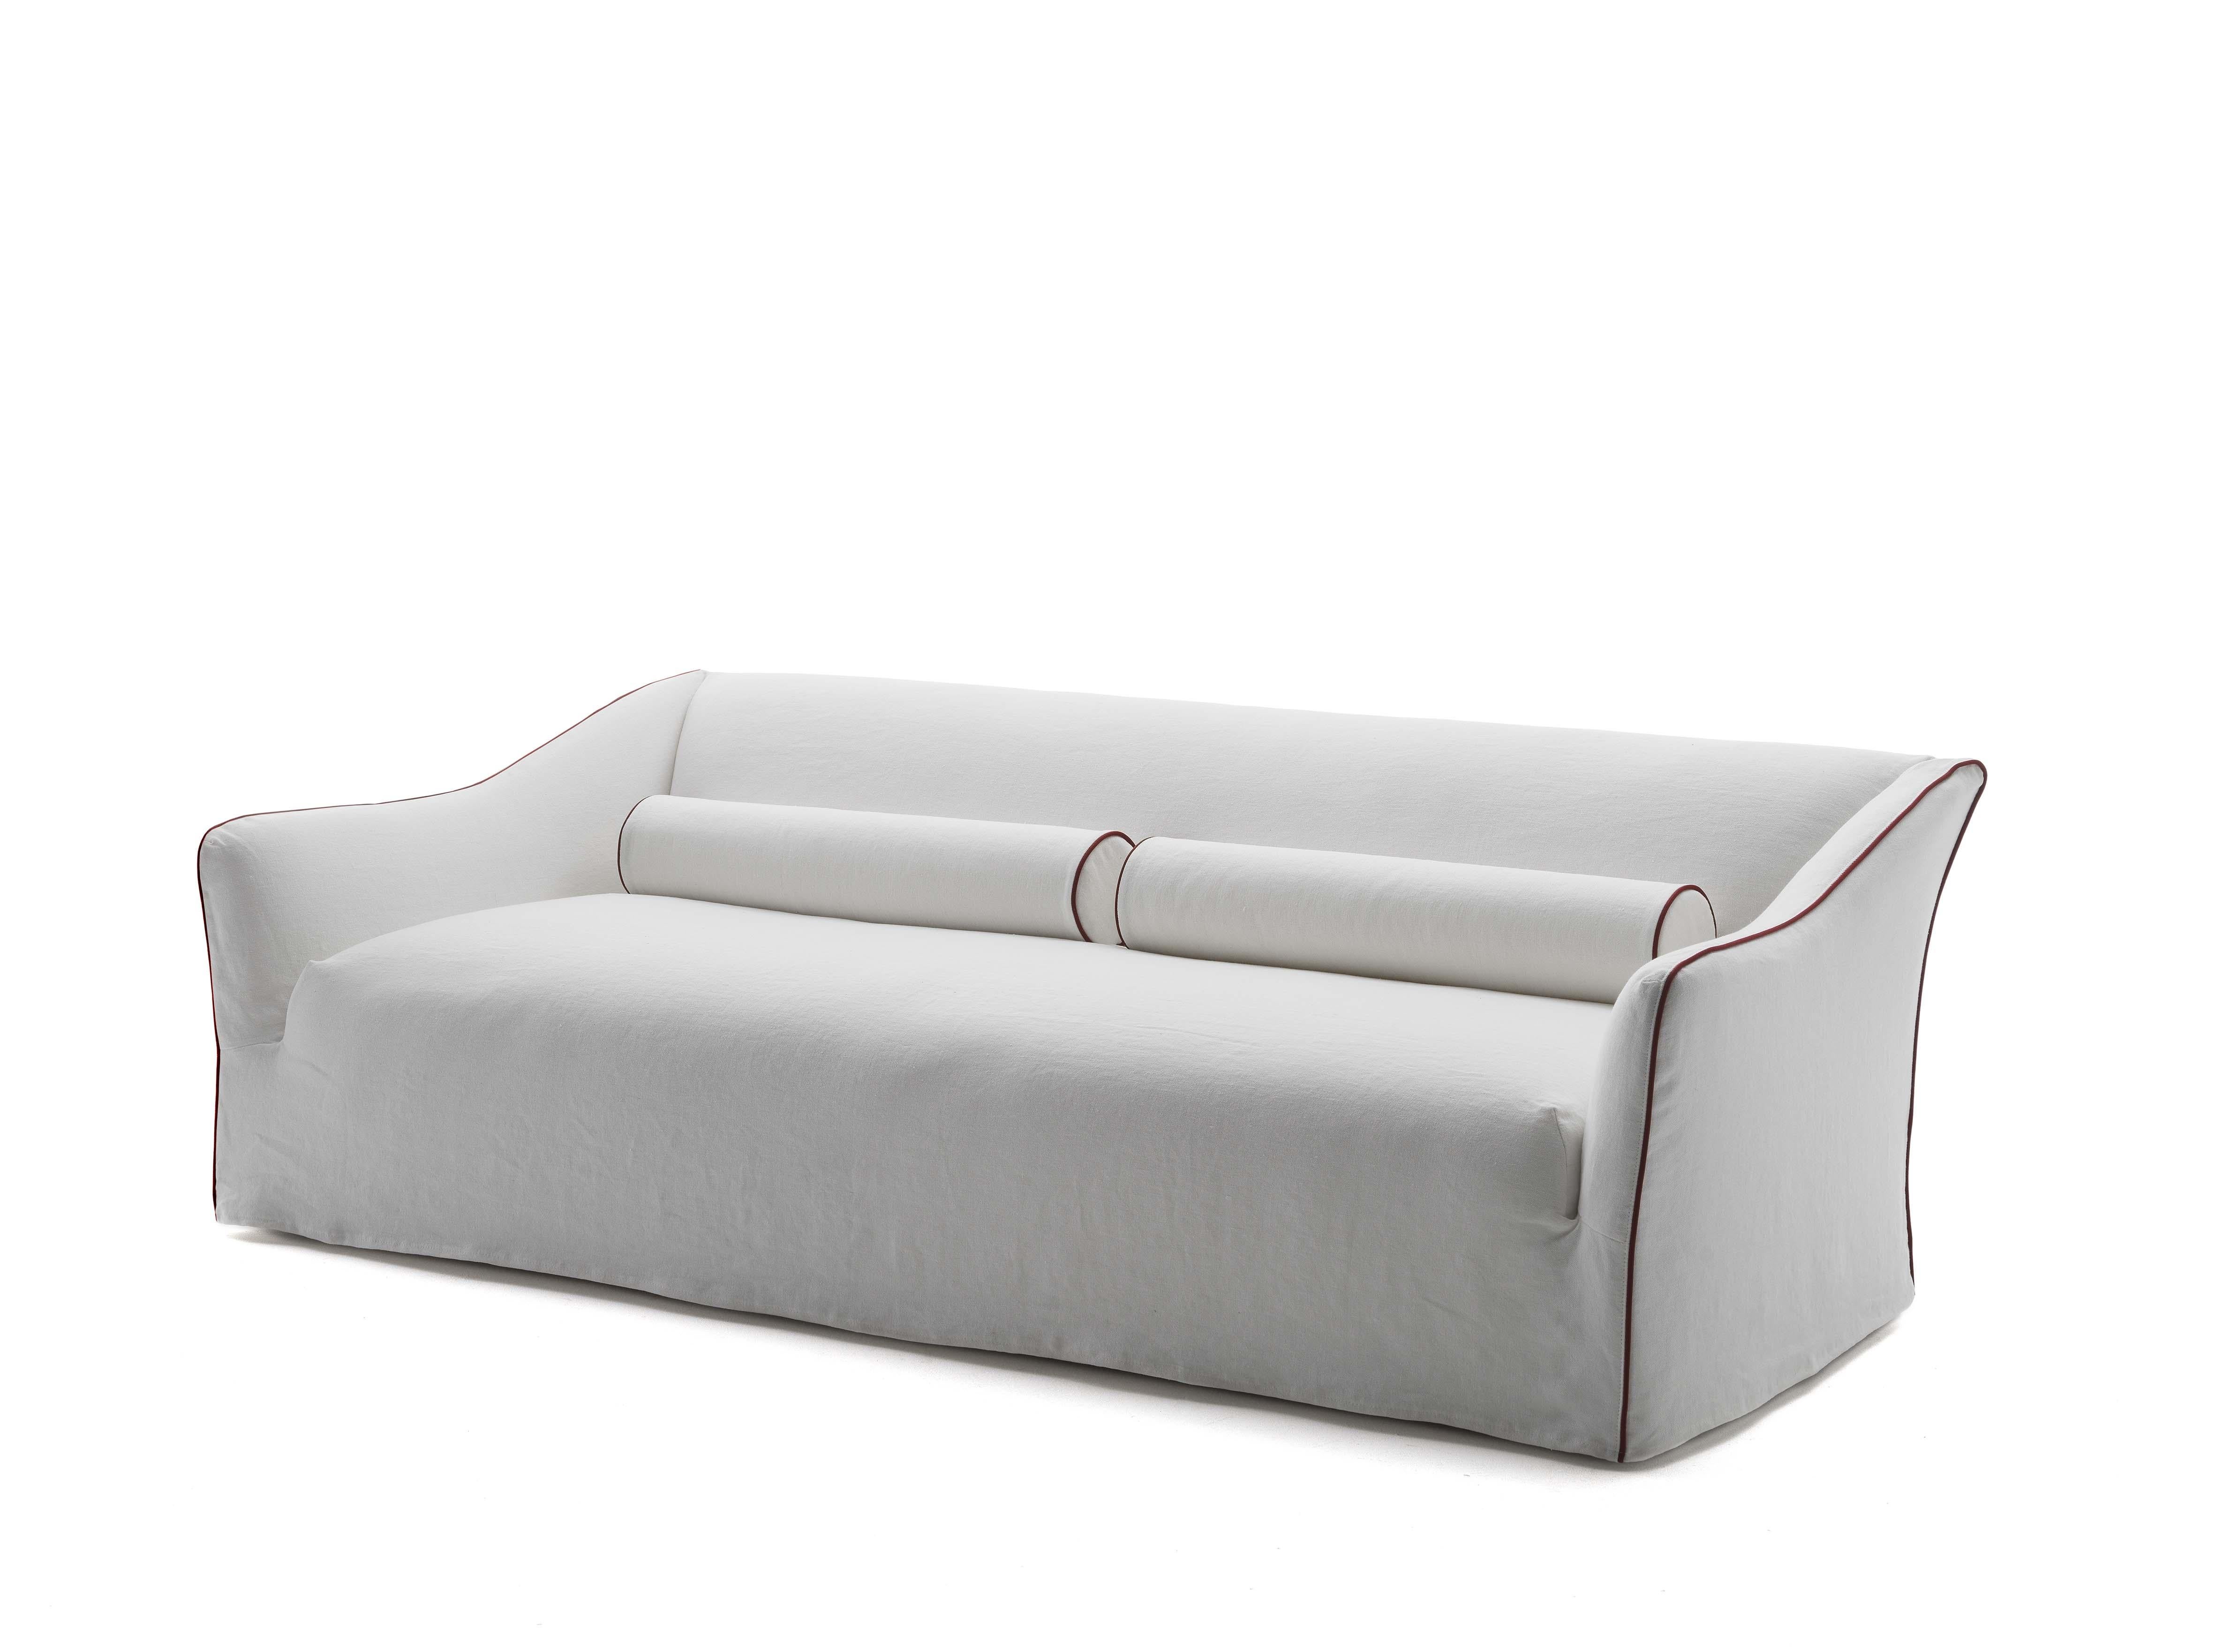 Contemporary Gervasoni Sofa Upholstered Saia 12 by David Lopez Quincoces For Sale